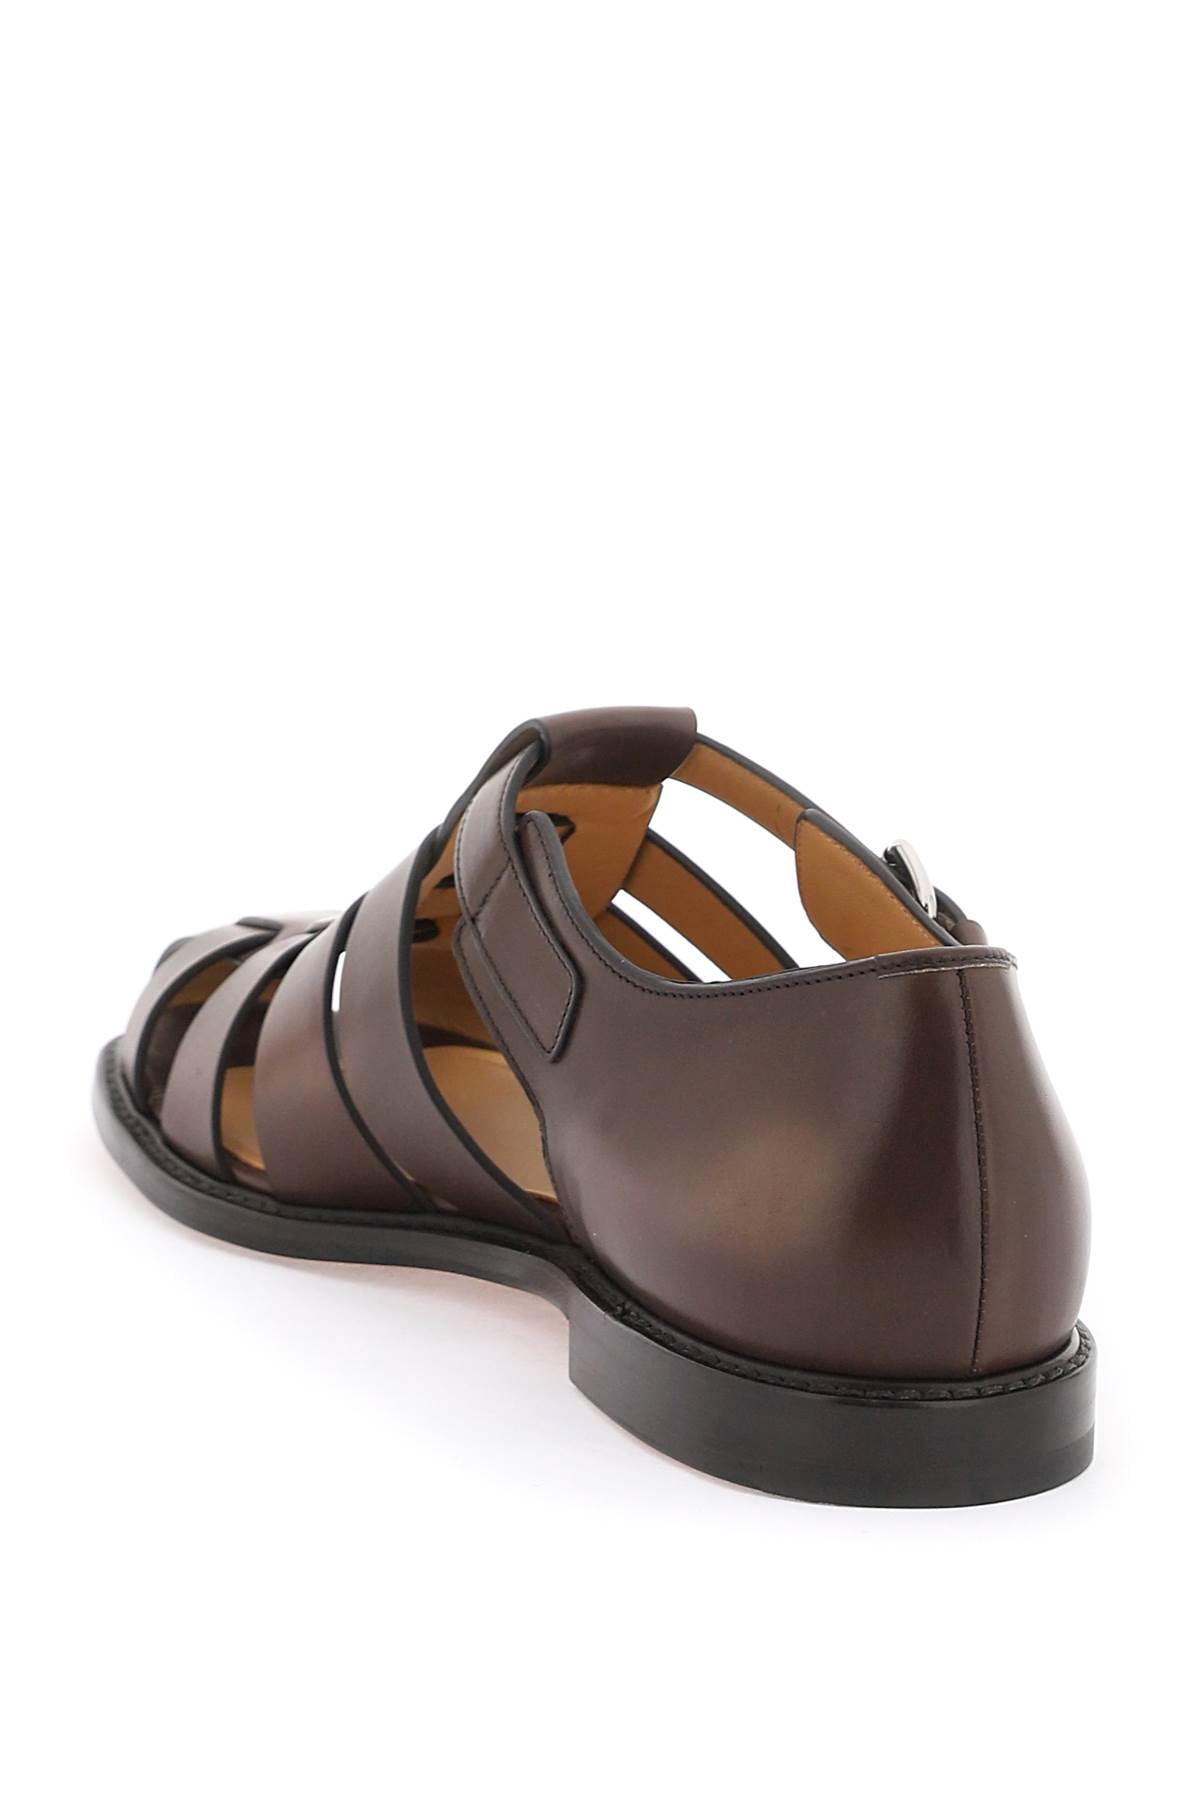 Church's leather fisherman sandals-2